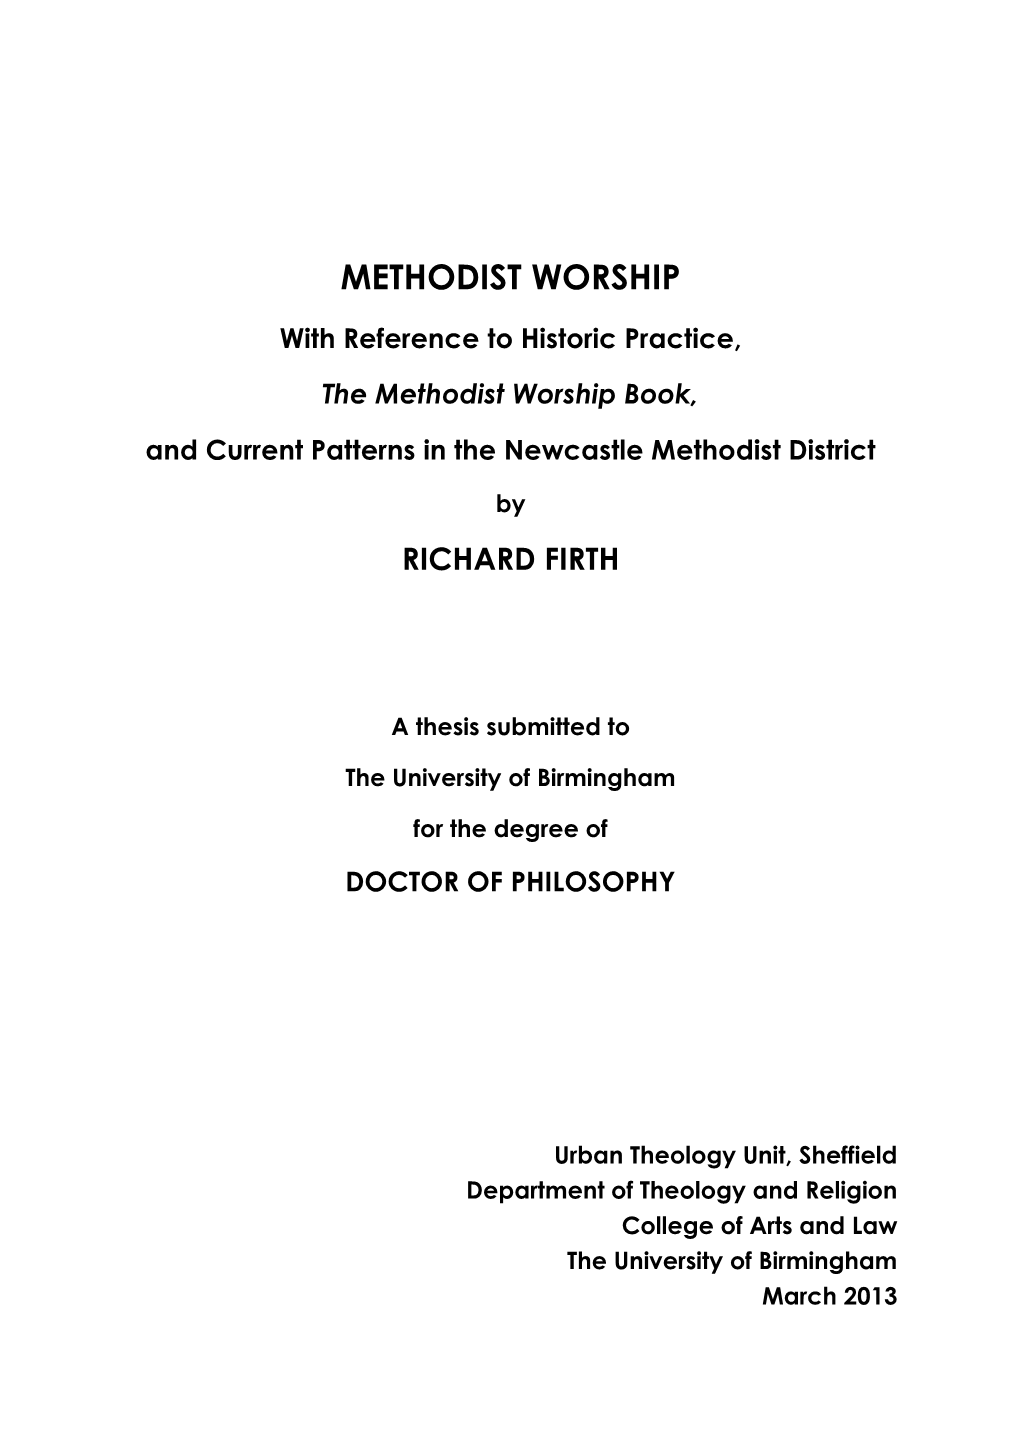 With Reference to Historic Practice, the Methodist Worship Book, and Current Patterns in the Newcastle Methodist District)